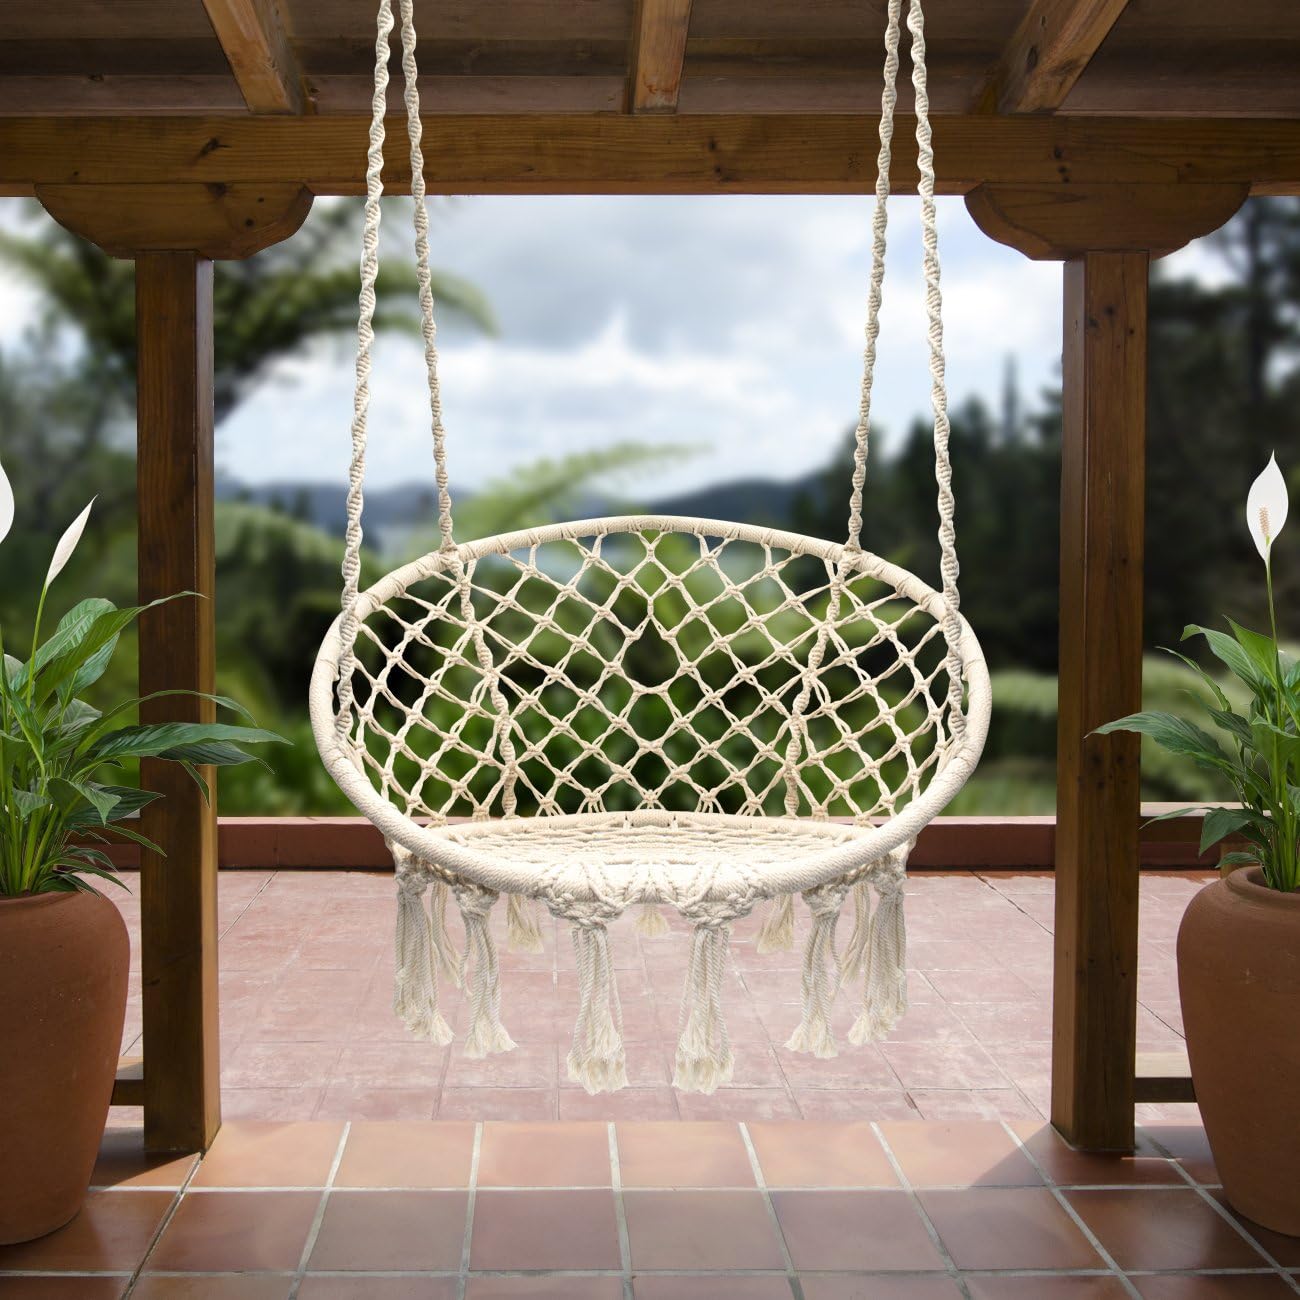 Sorbus Swing Chair Macrame Hanging Hammock Chair – Stylish Decorative Premium Cotton Ceiling Boho Chair for Durability- Indoor, Outdoor, Chair, Patio, Porch, Garden, Gifts - Max 250Lbs